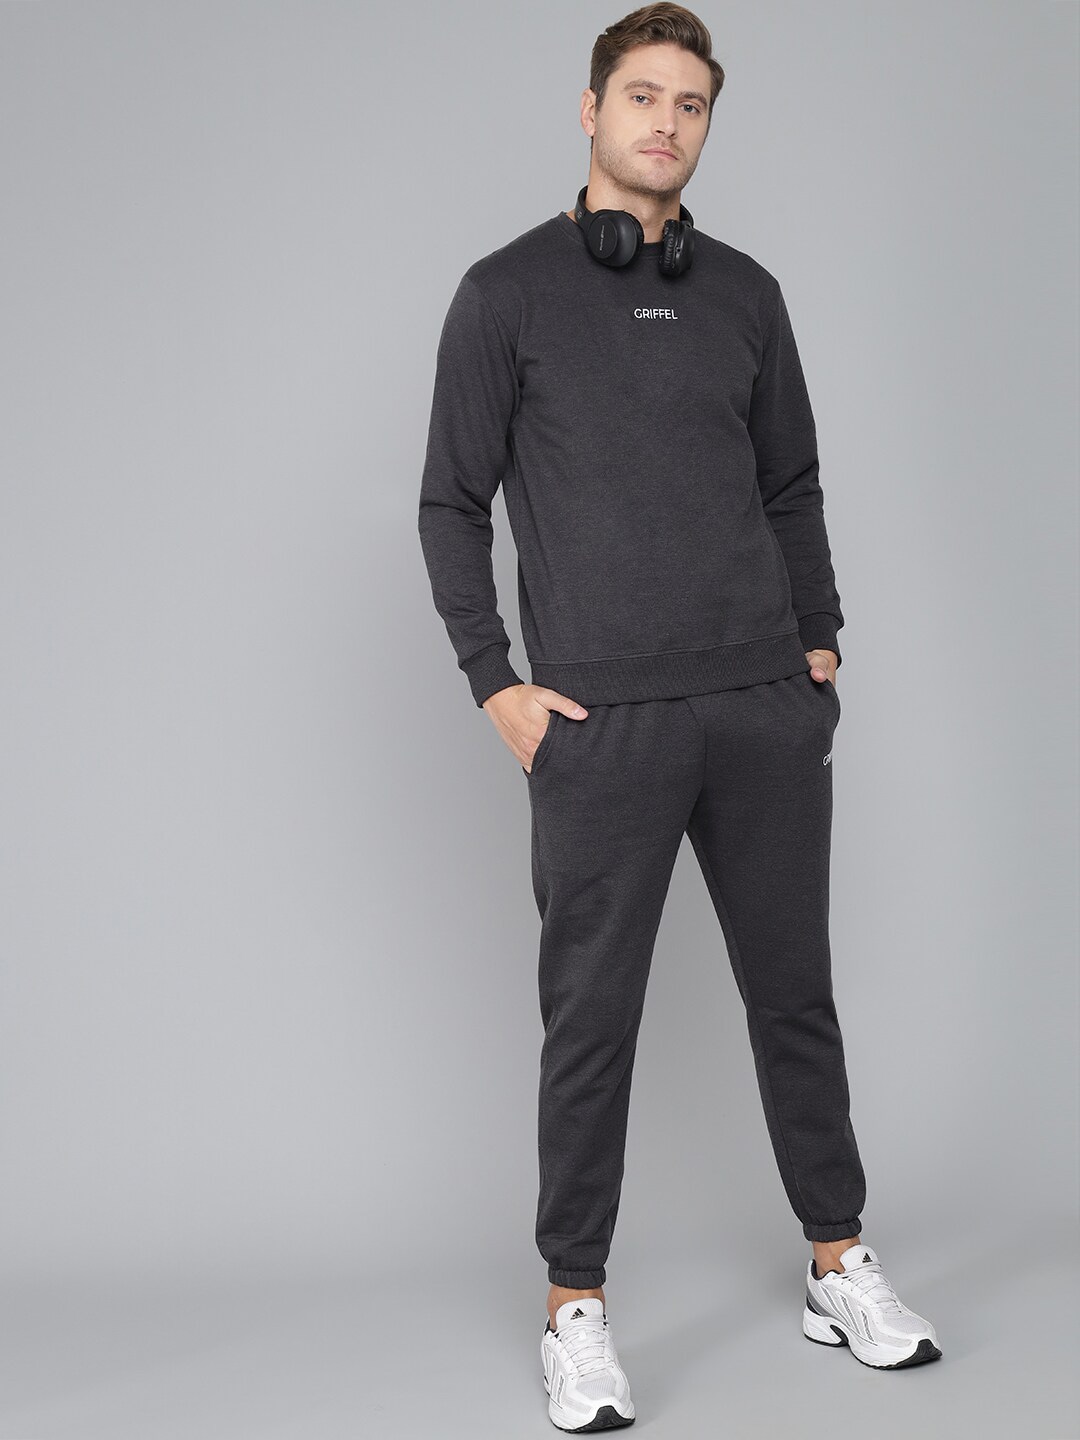 Clothing Tracksuits | GRIFFEL Men Charcoal-Grey Solid Cotton Tracksuit - TB05832